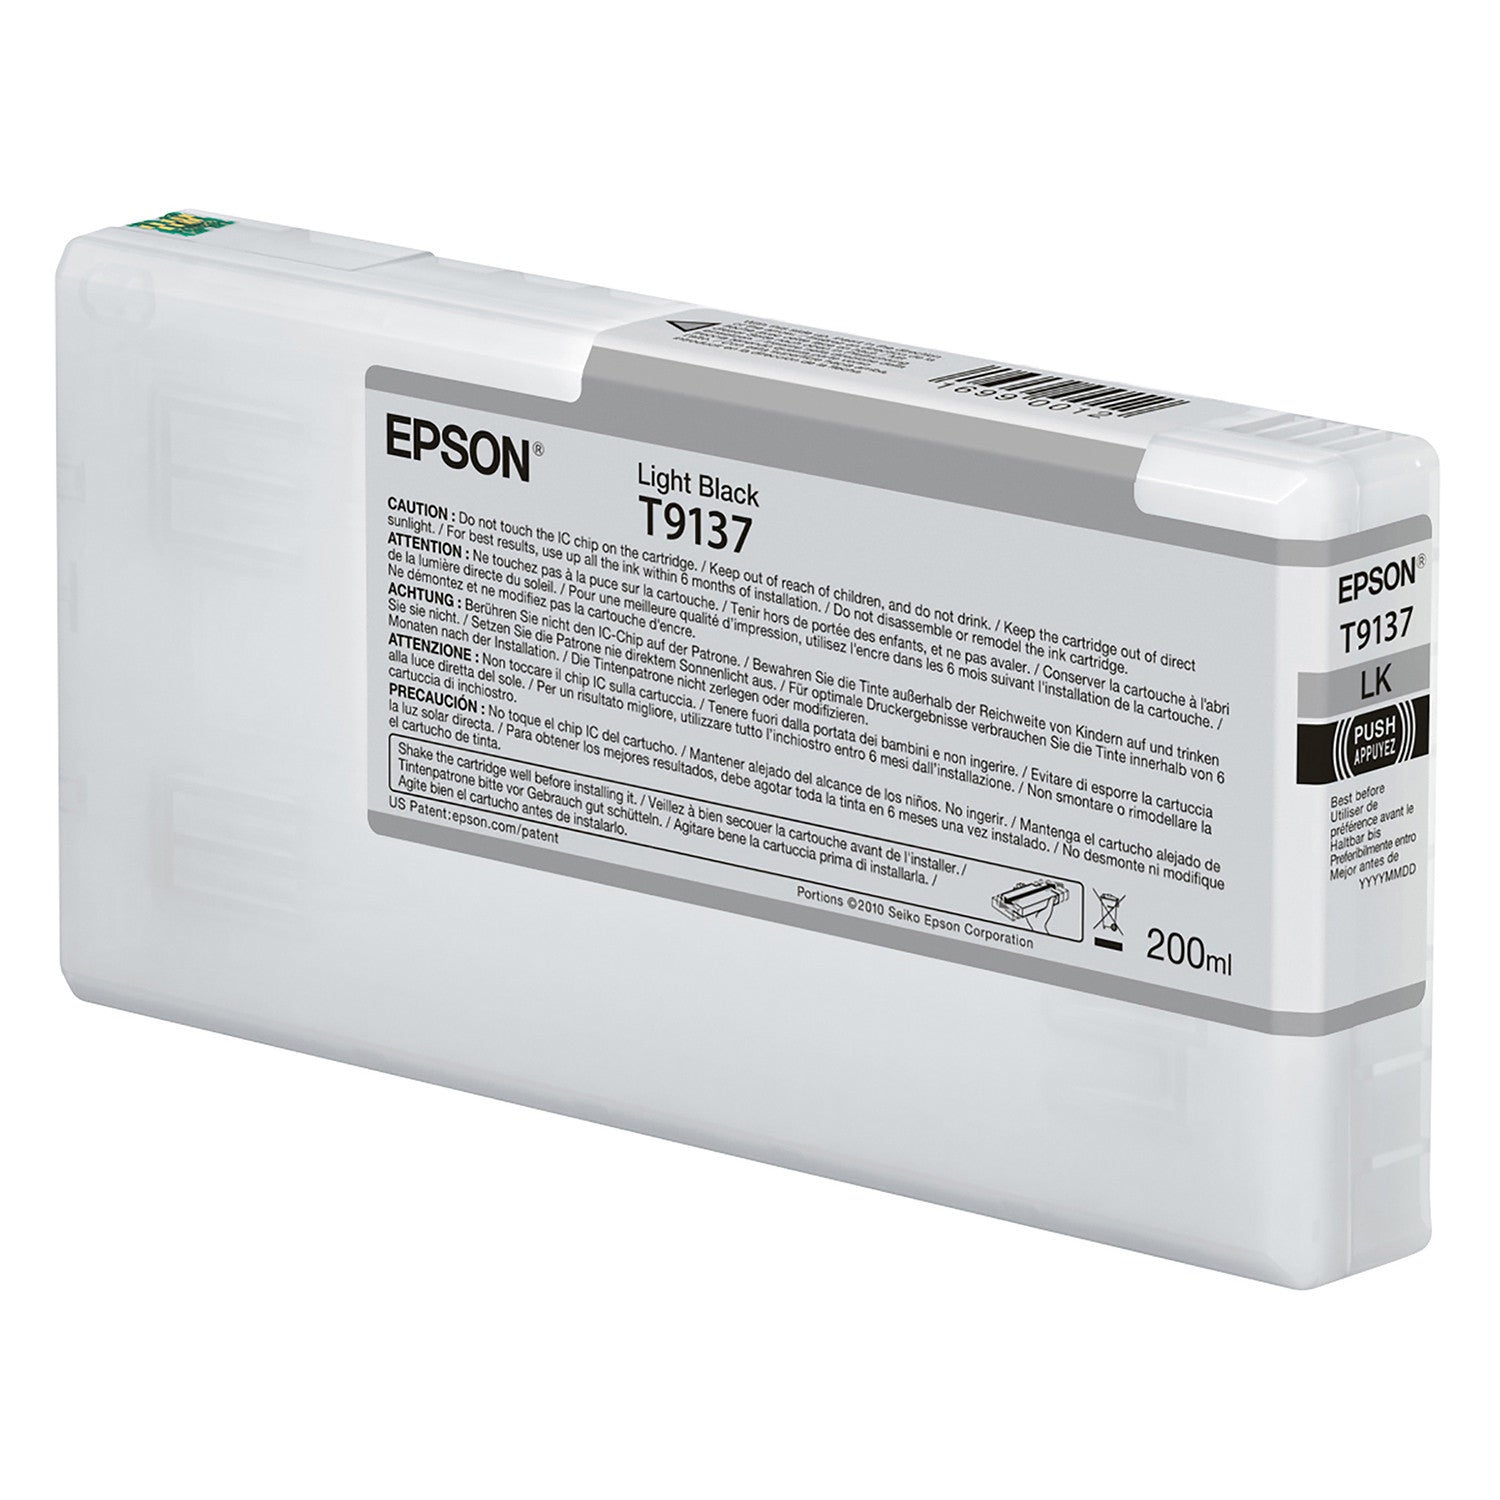 Epson T913700 P5000 Ultrachrome HD Ink 200ml Light Black, papers printer ink, Epson - Pictureline 